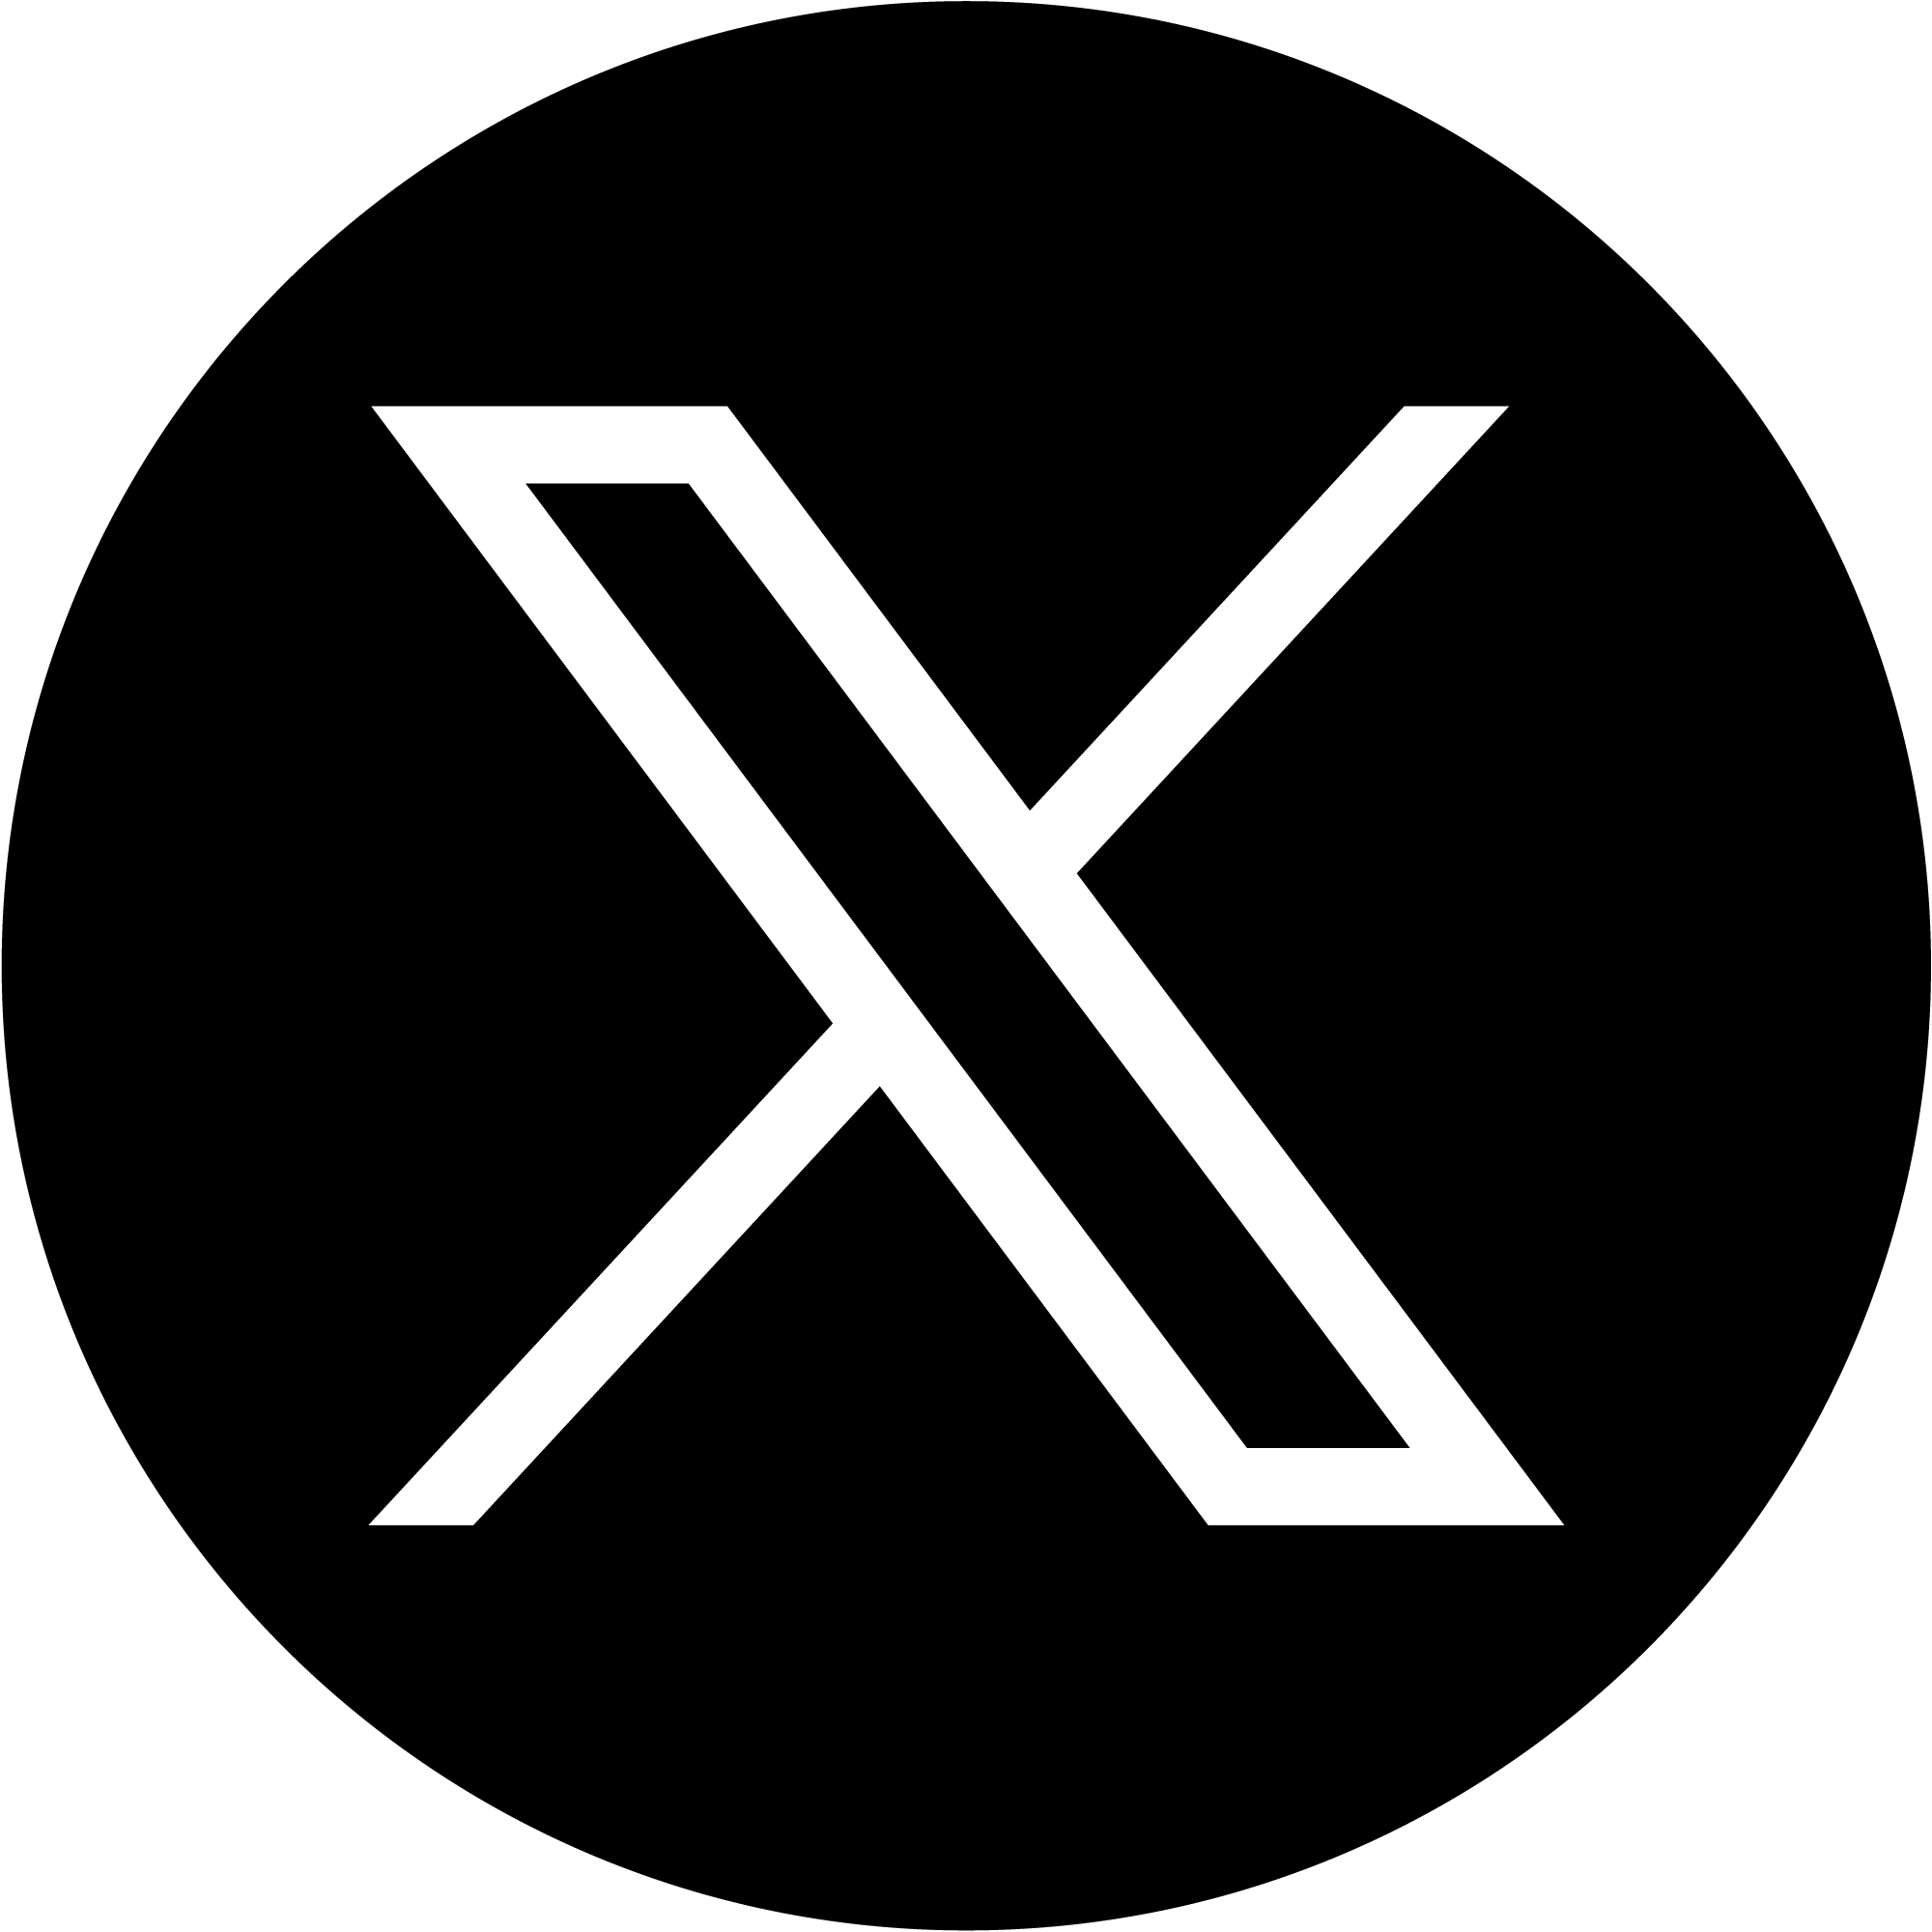 1690643640twitter-x-icon-png